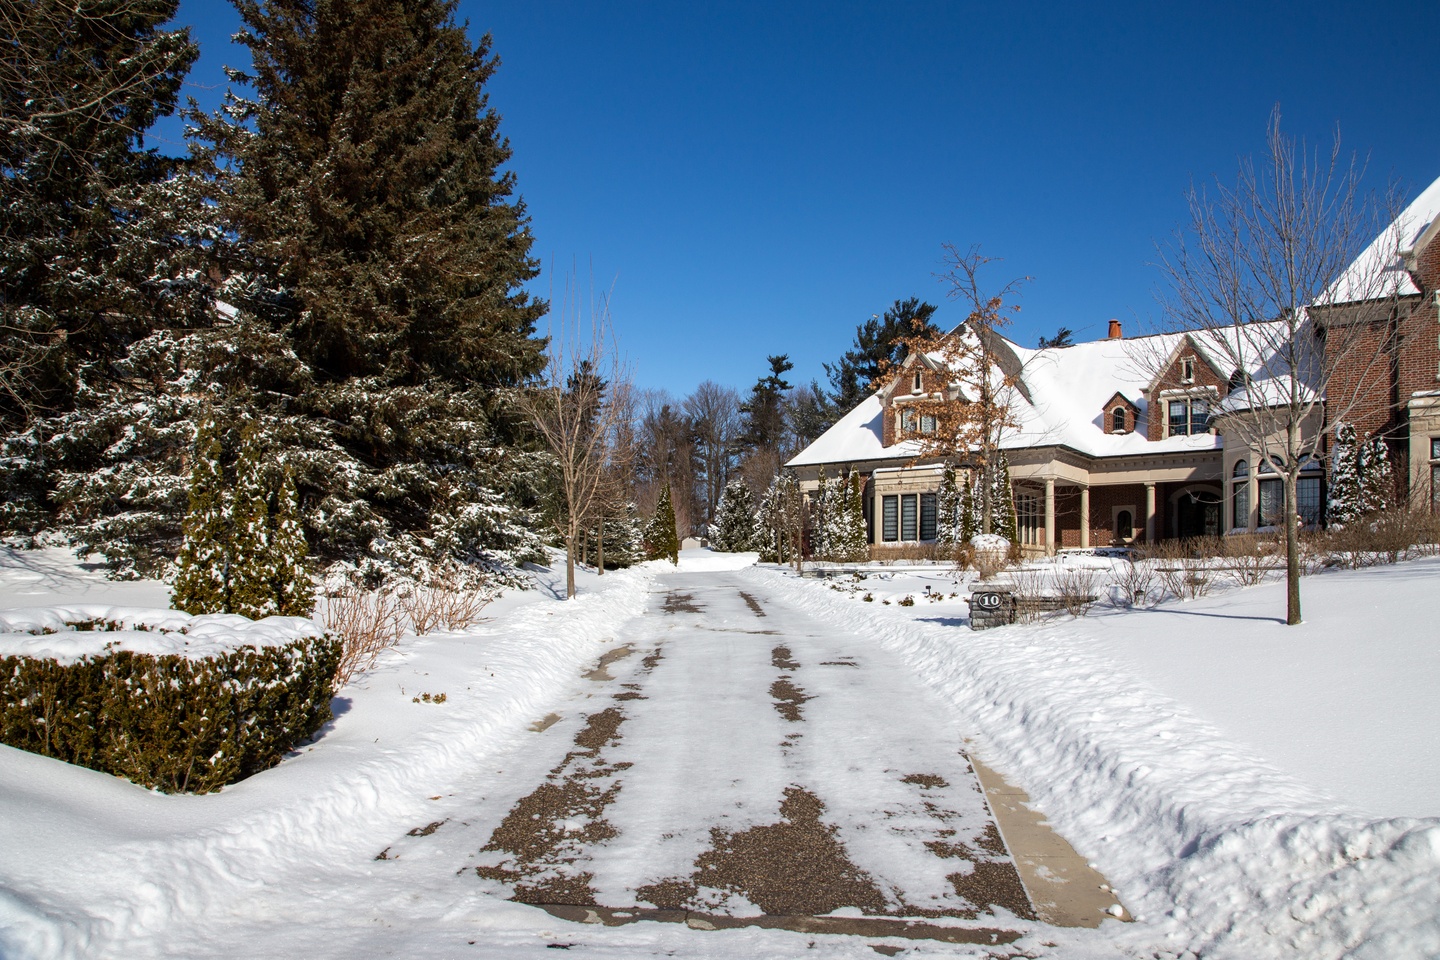 How to Protect Your Concrete Driveway this Winter